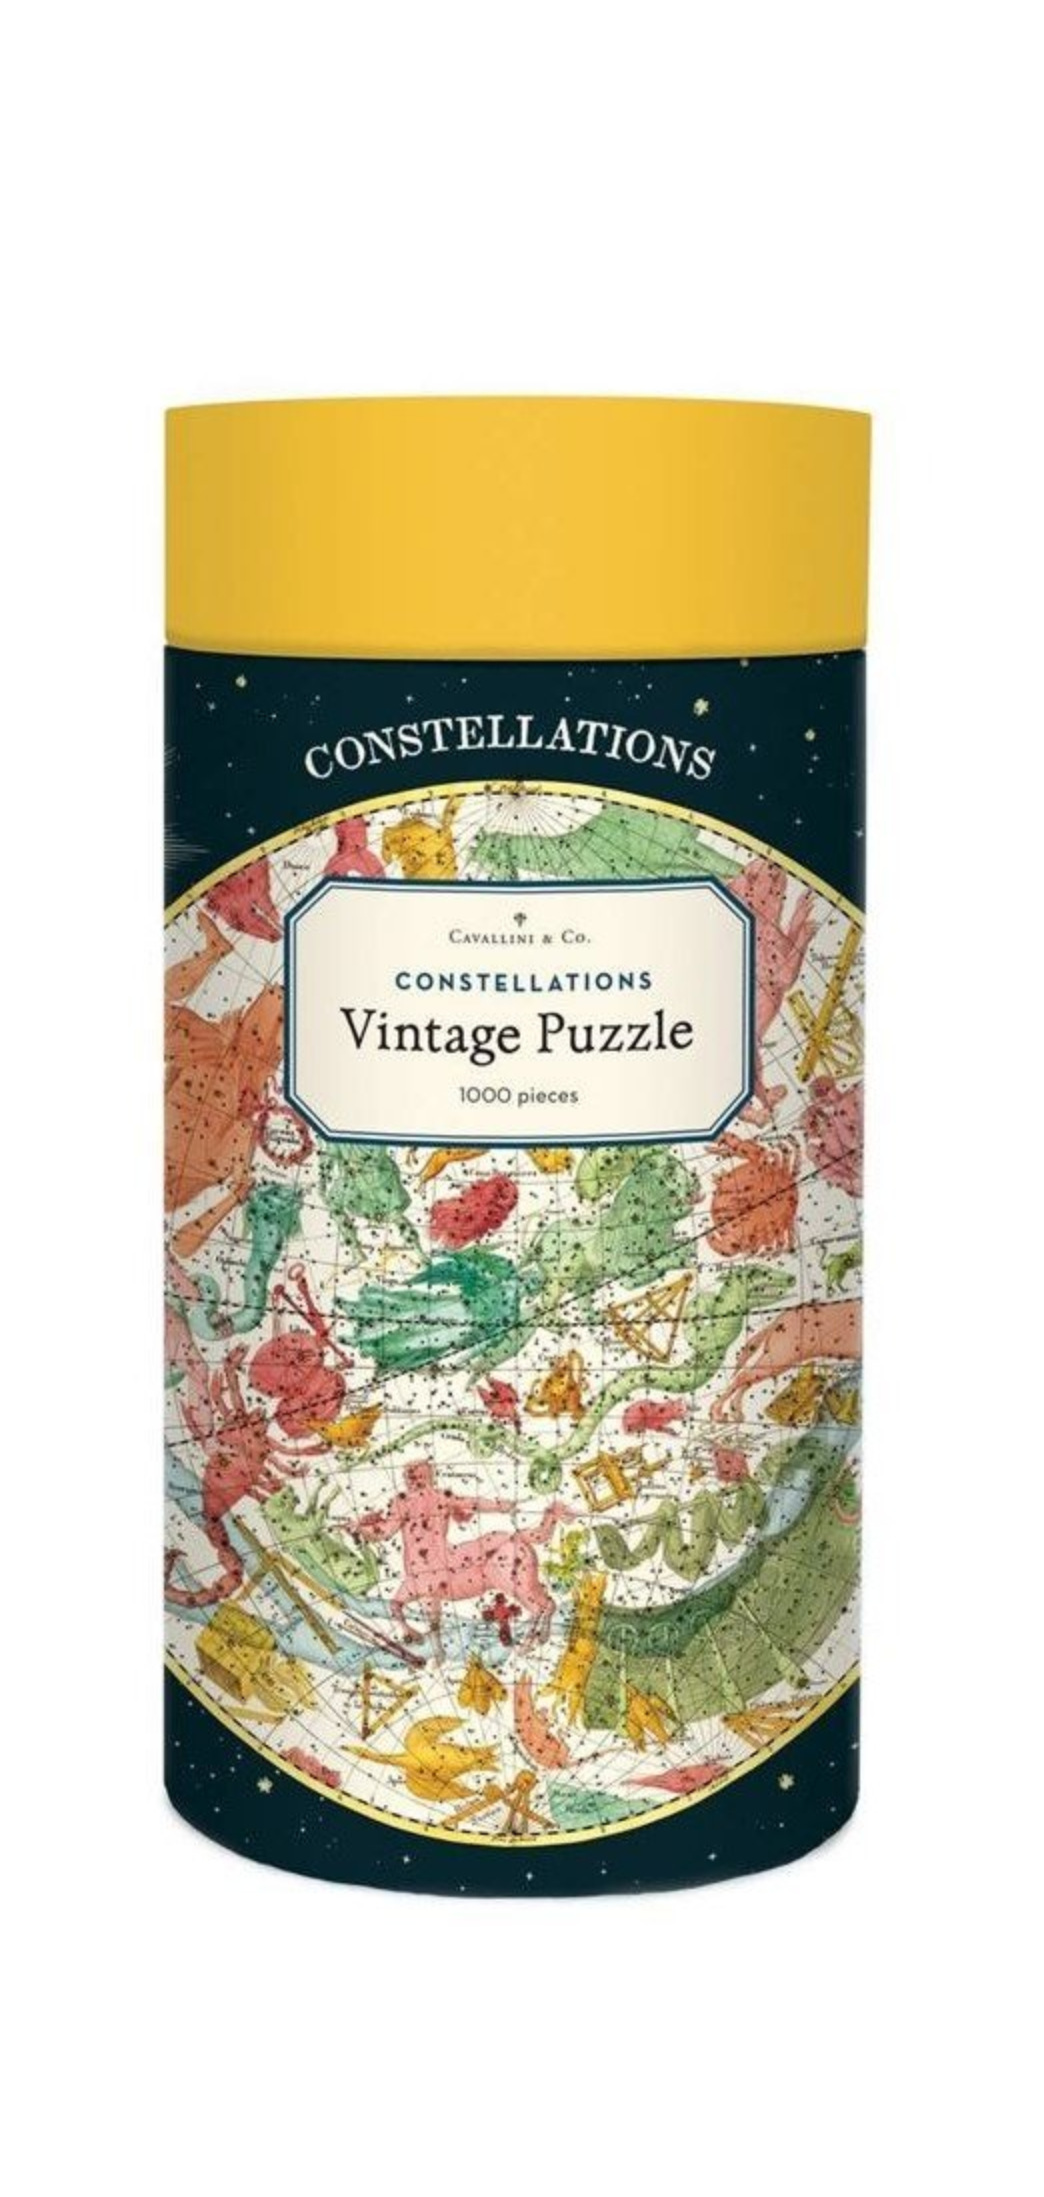 Cavallini & Co 1000 Piece Jigsaw Puzzle: Vintage Poster Constellations ...